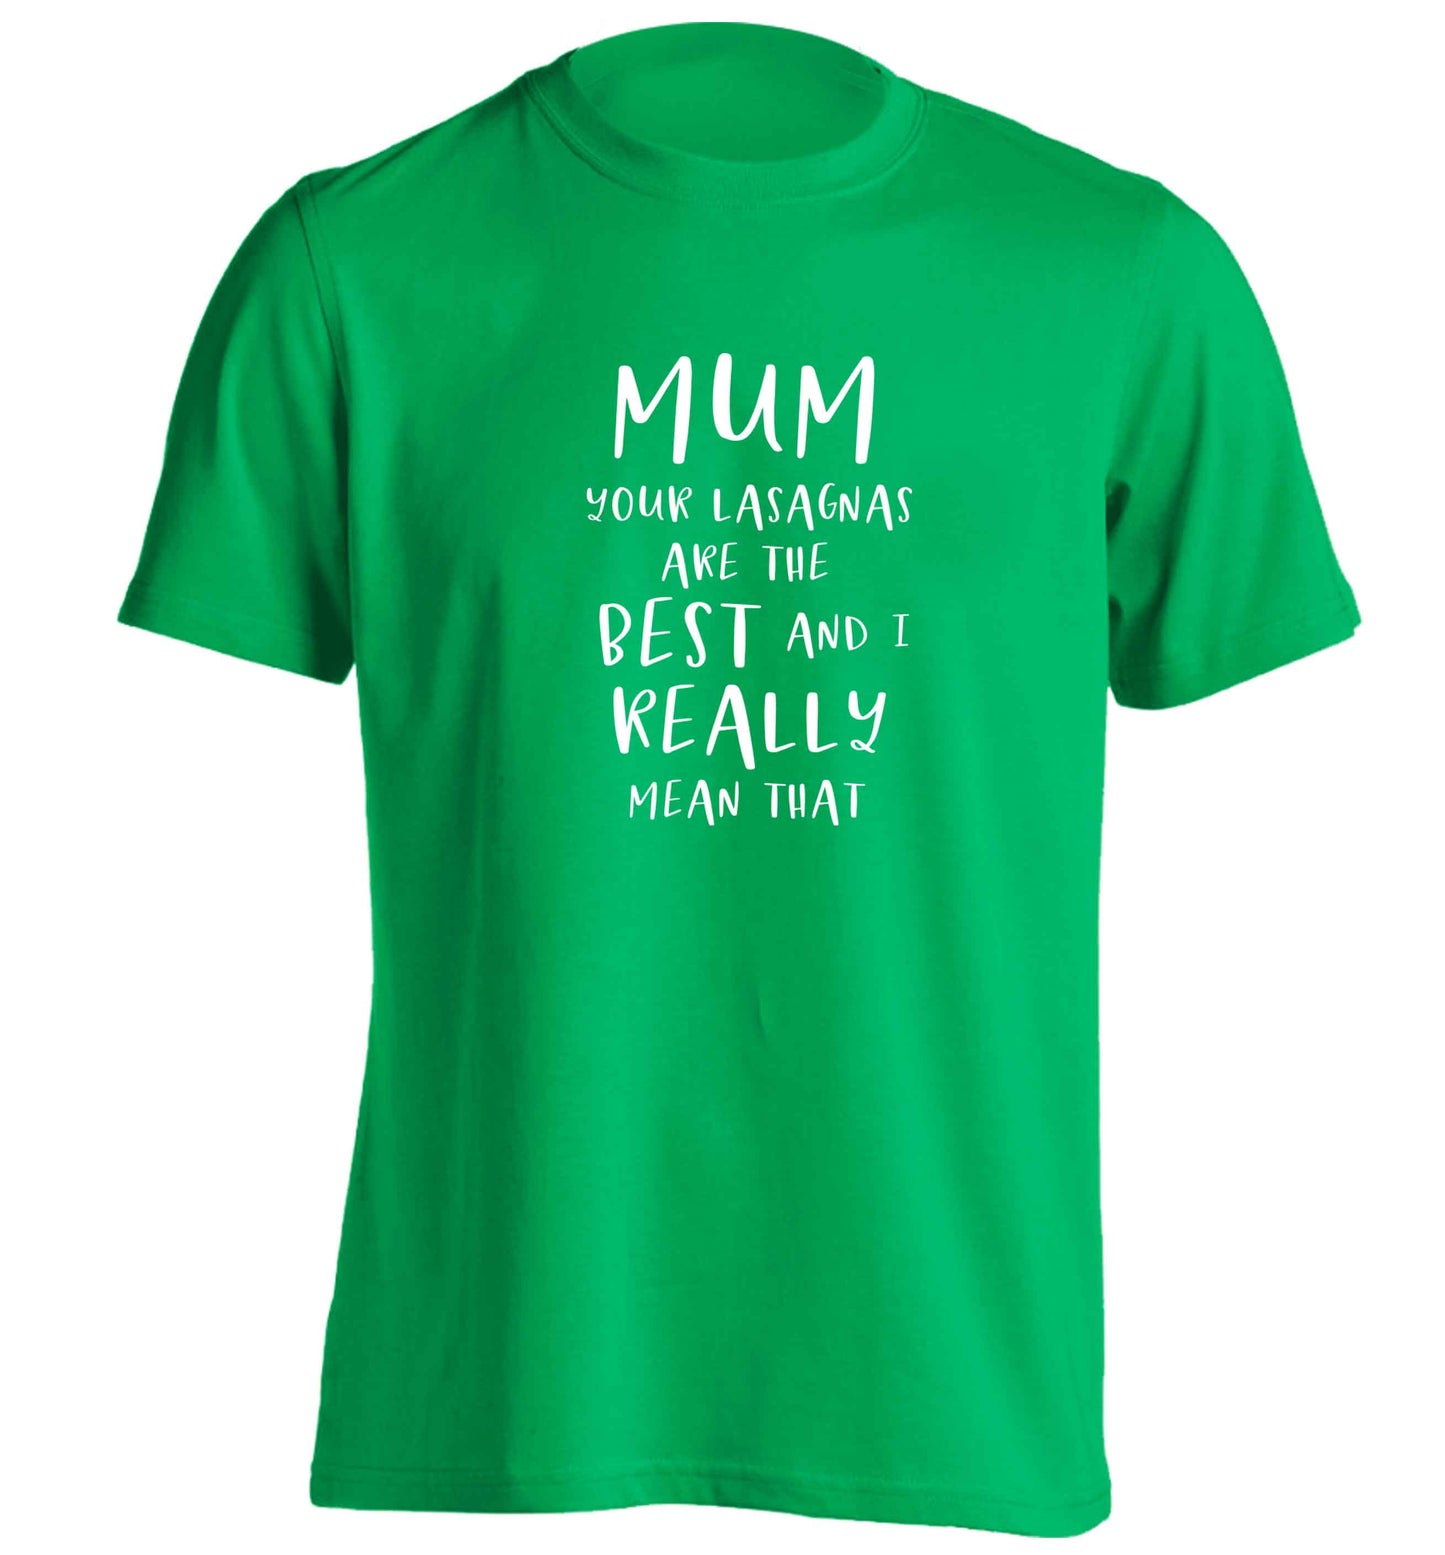 Funny gifts for your mum on mother's dayor her birthday! Mum your lasagnas are the best and I really mean that adults unisex green Tshirt 2XL